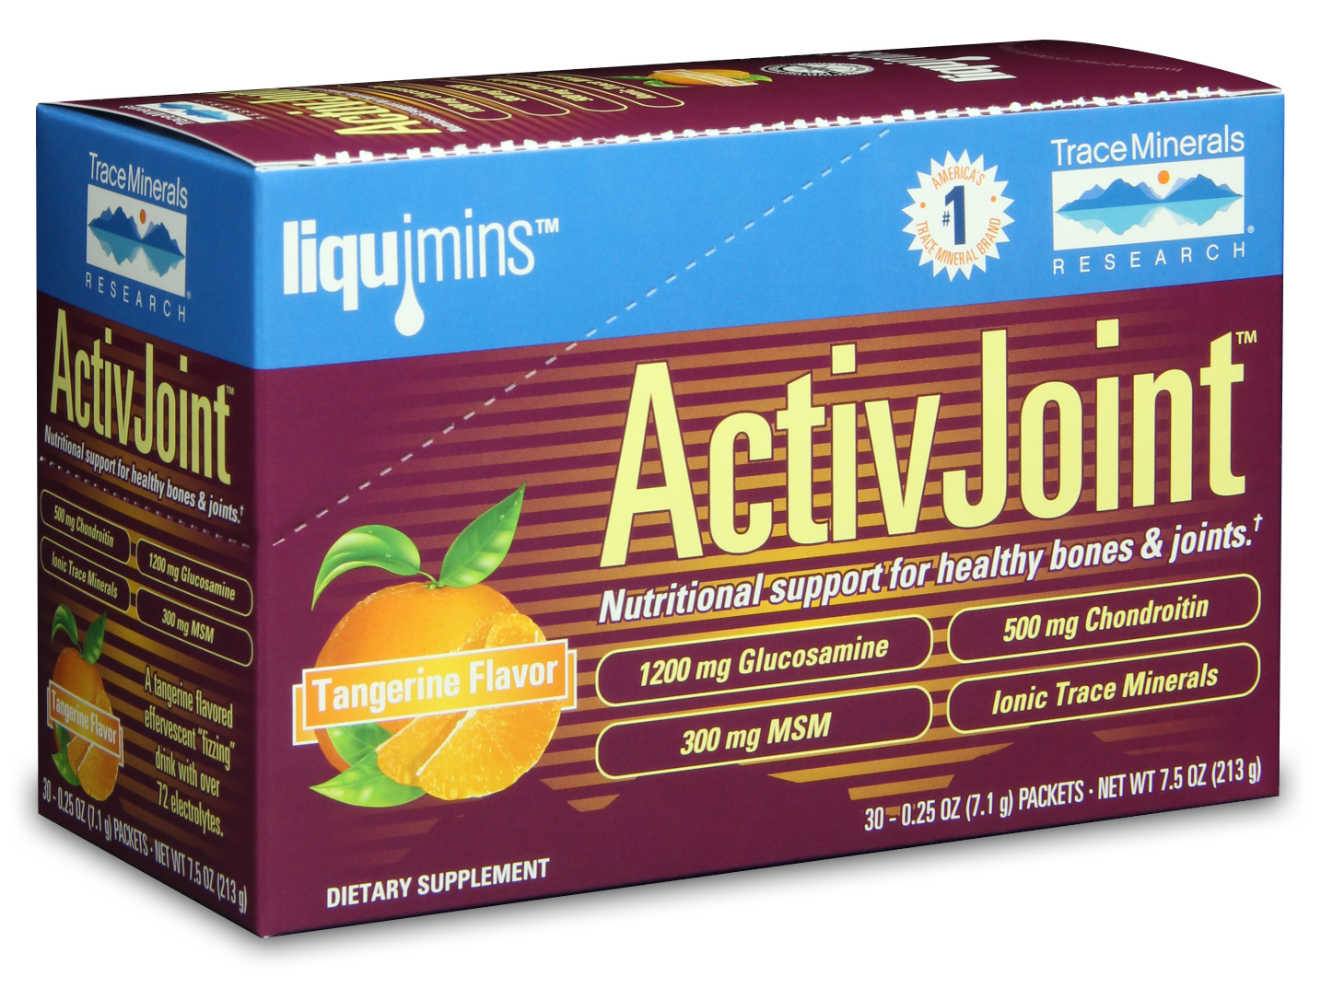 Trace Minerals Research: Activ Joint 30 Packets